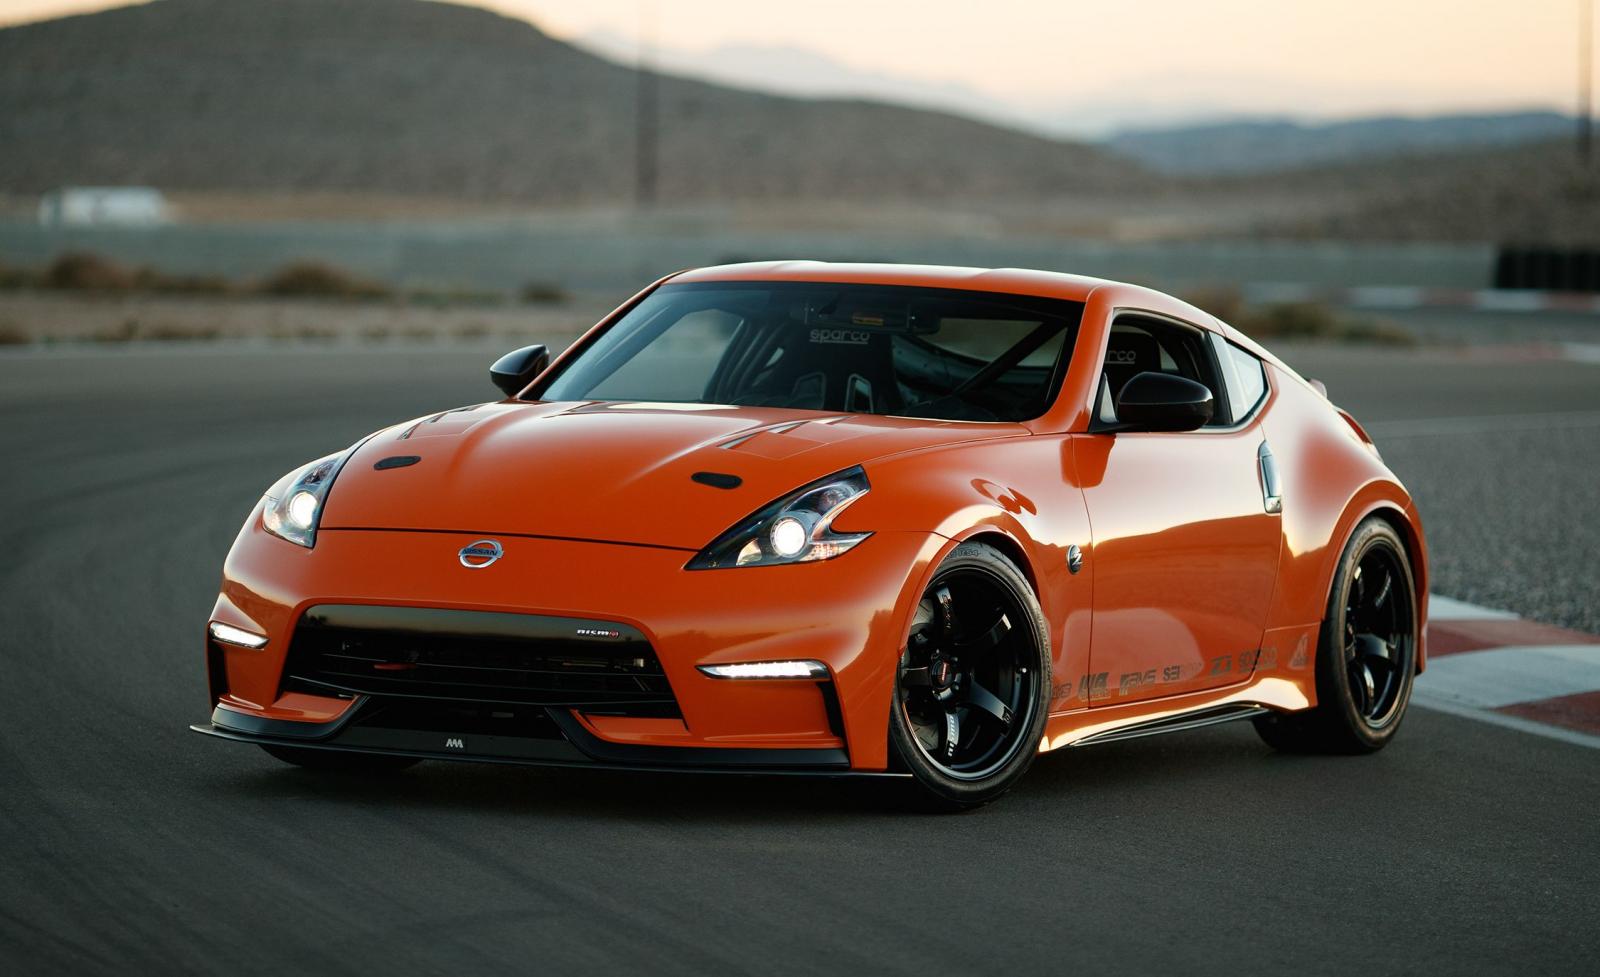 Nissan 370z Review And Specs Things You Should Know Before Purchasing